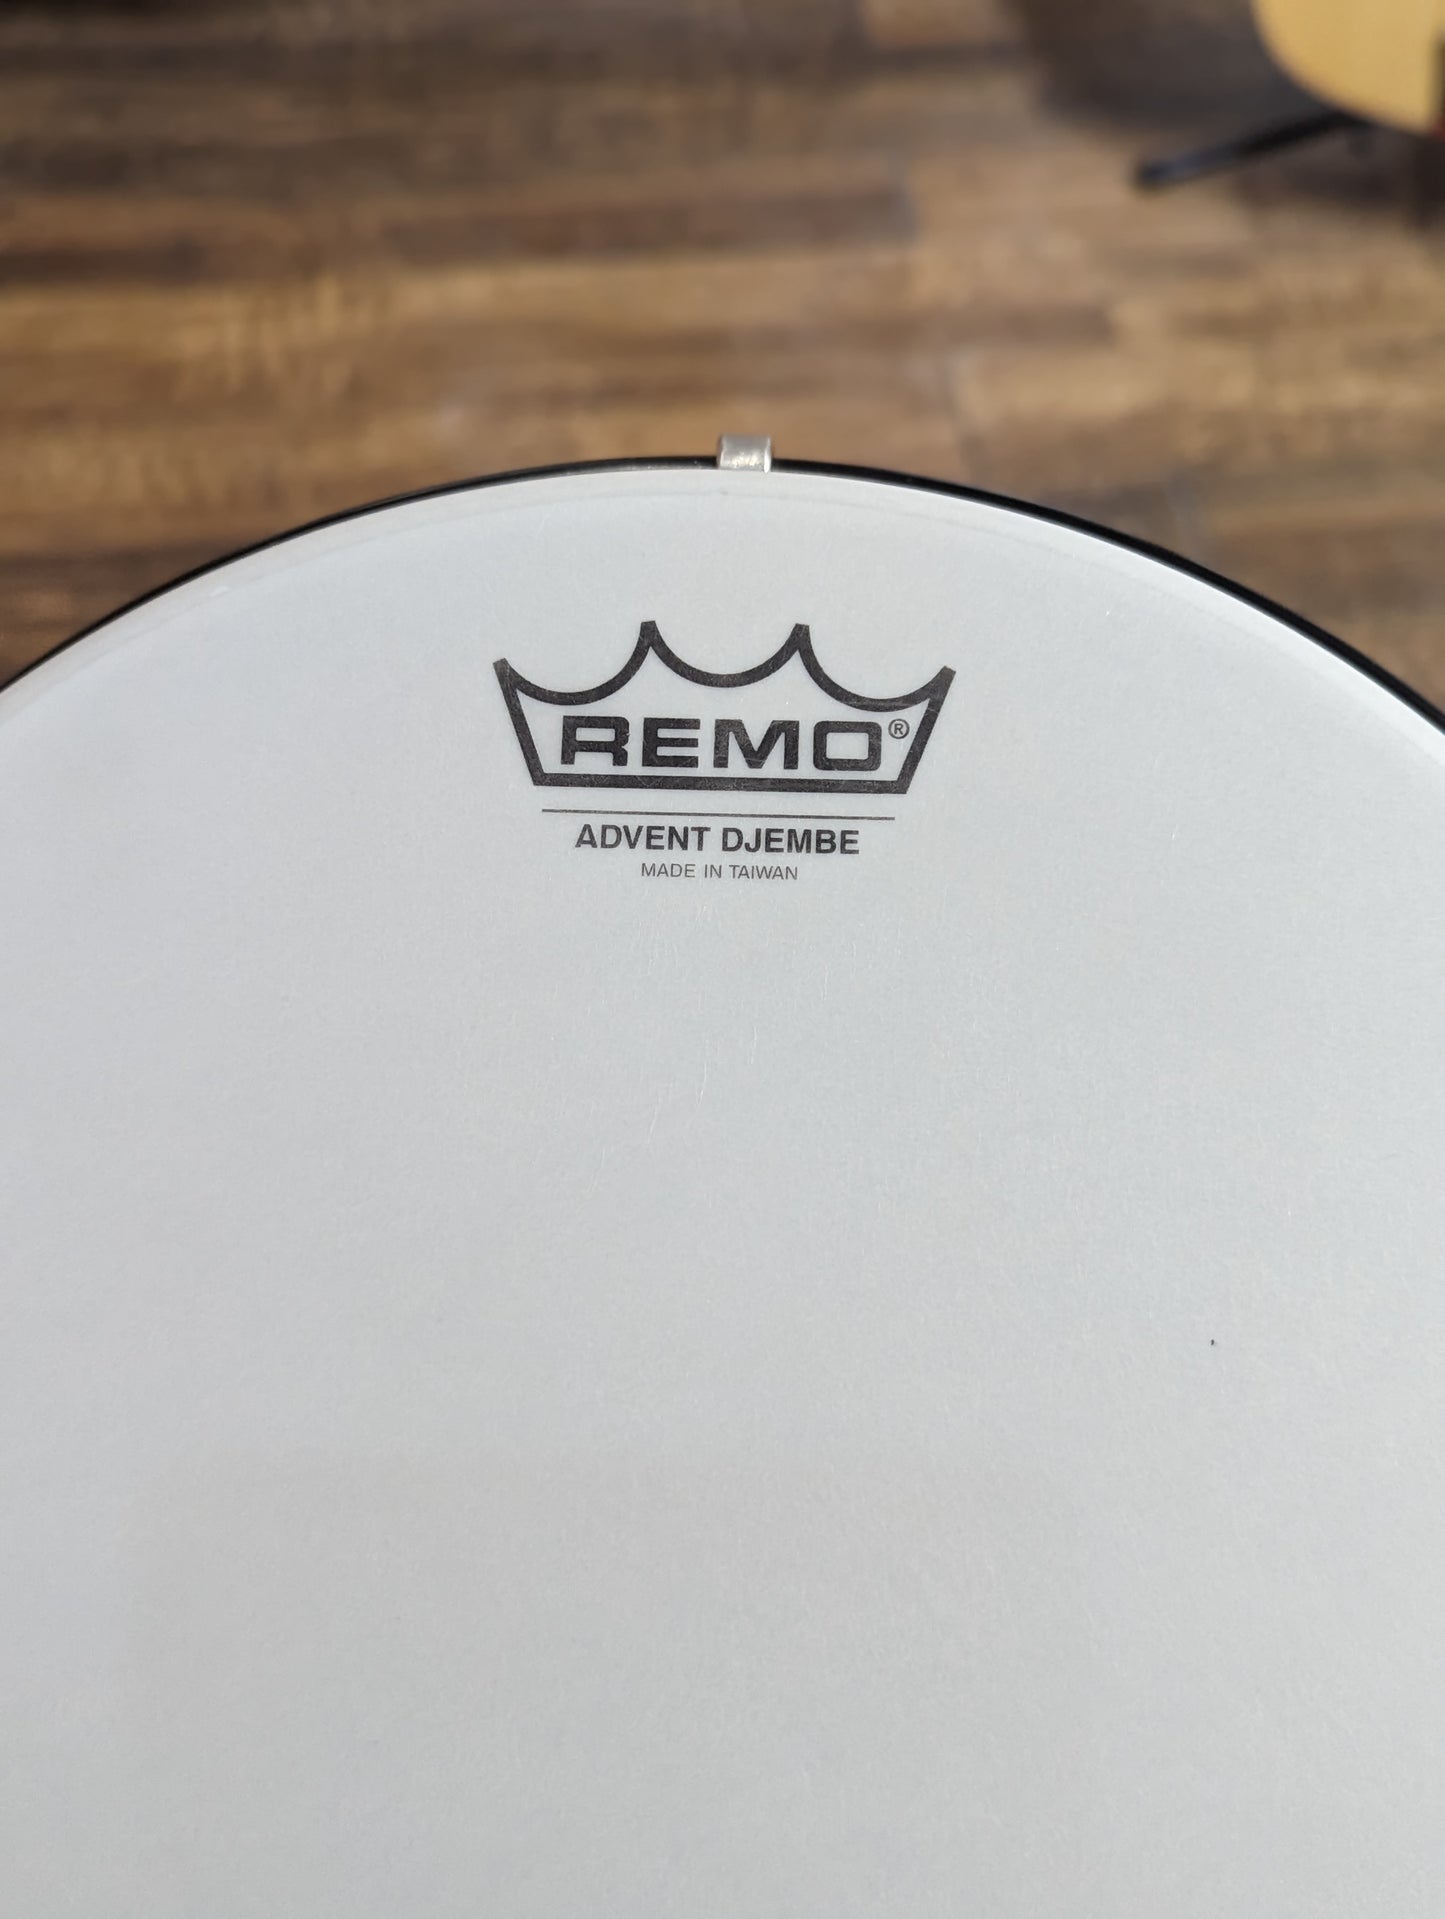 Remo Advent 10" Djembe - Black (Used)